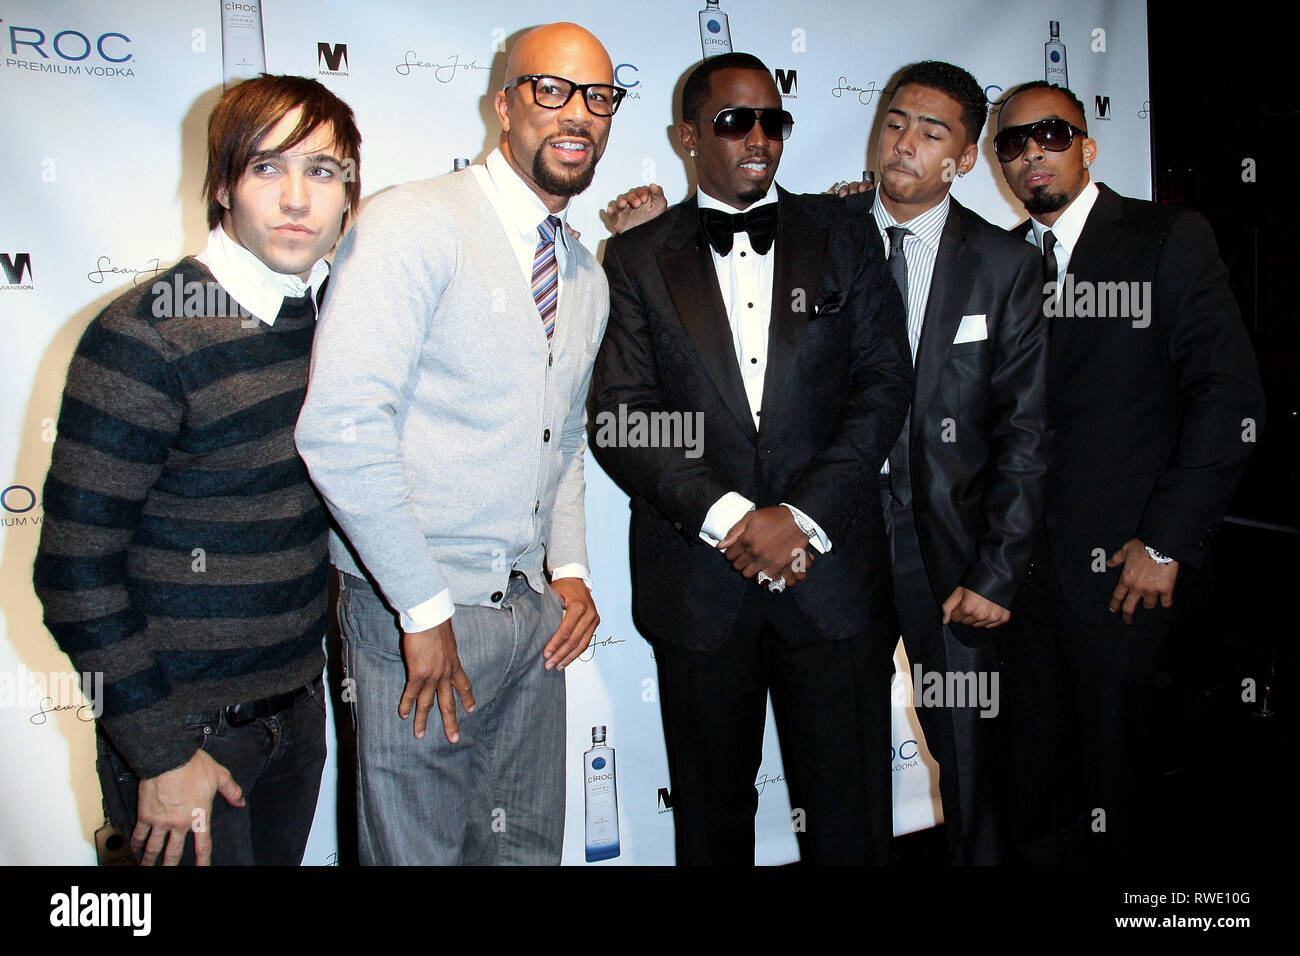 new-york-usa-06-nov-2008-pete-wentz-common-sean-diddy-combs-quincy-combs-dallas-austin-at-the-thursday-nov-6-2008-birthday-party-for-sean-diddy-combs-at-mansion-in-new-york-usa-credit-steve-macksd-mack-picturesalamy-RWE10G.jpg